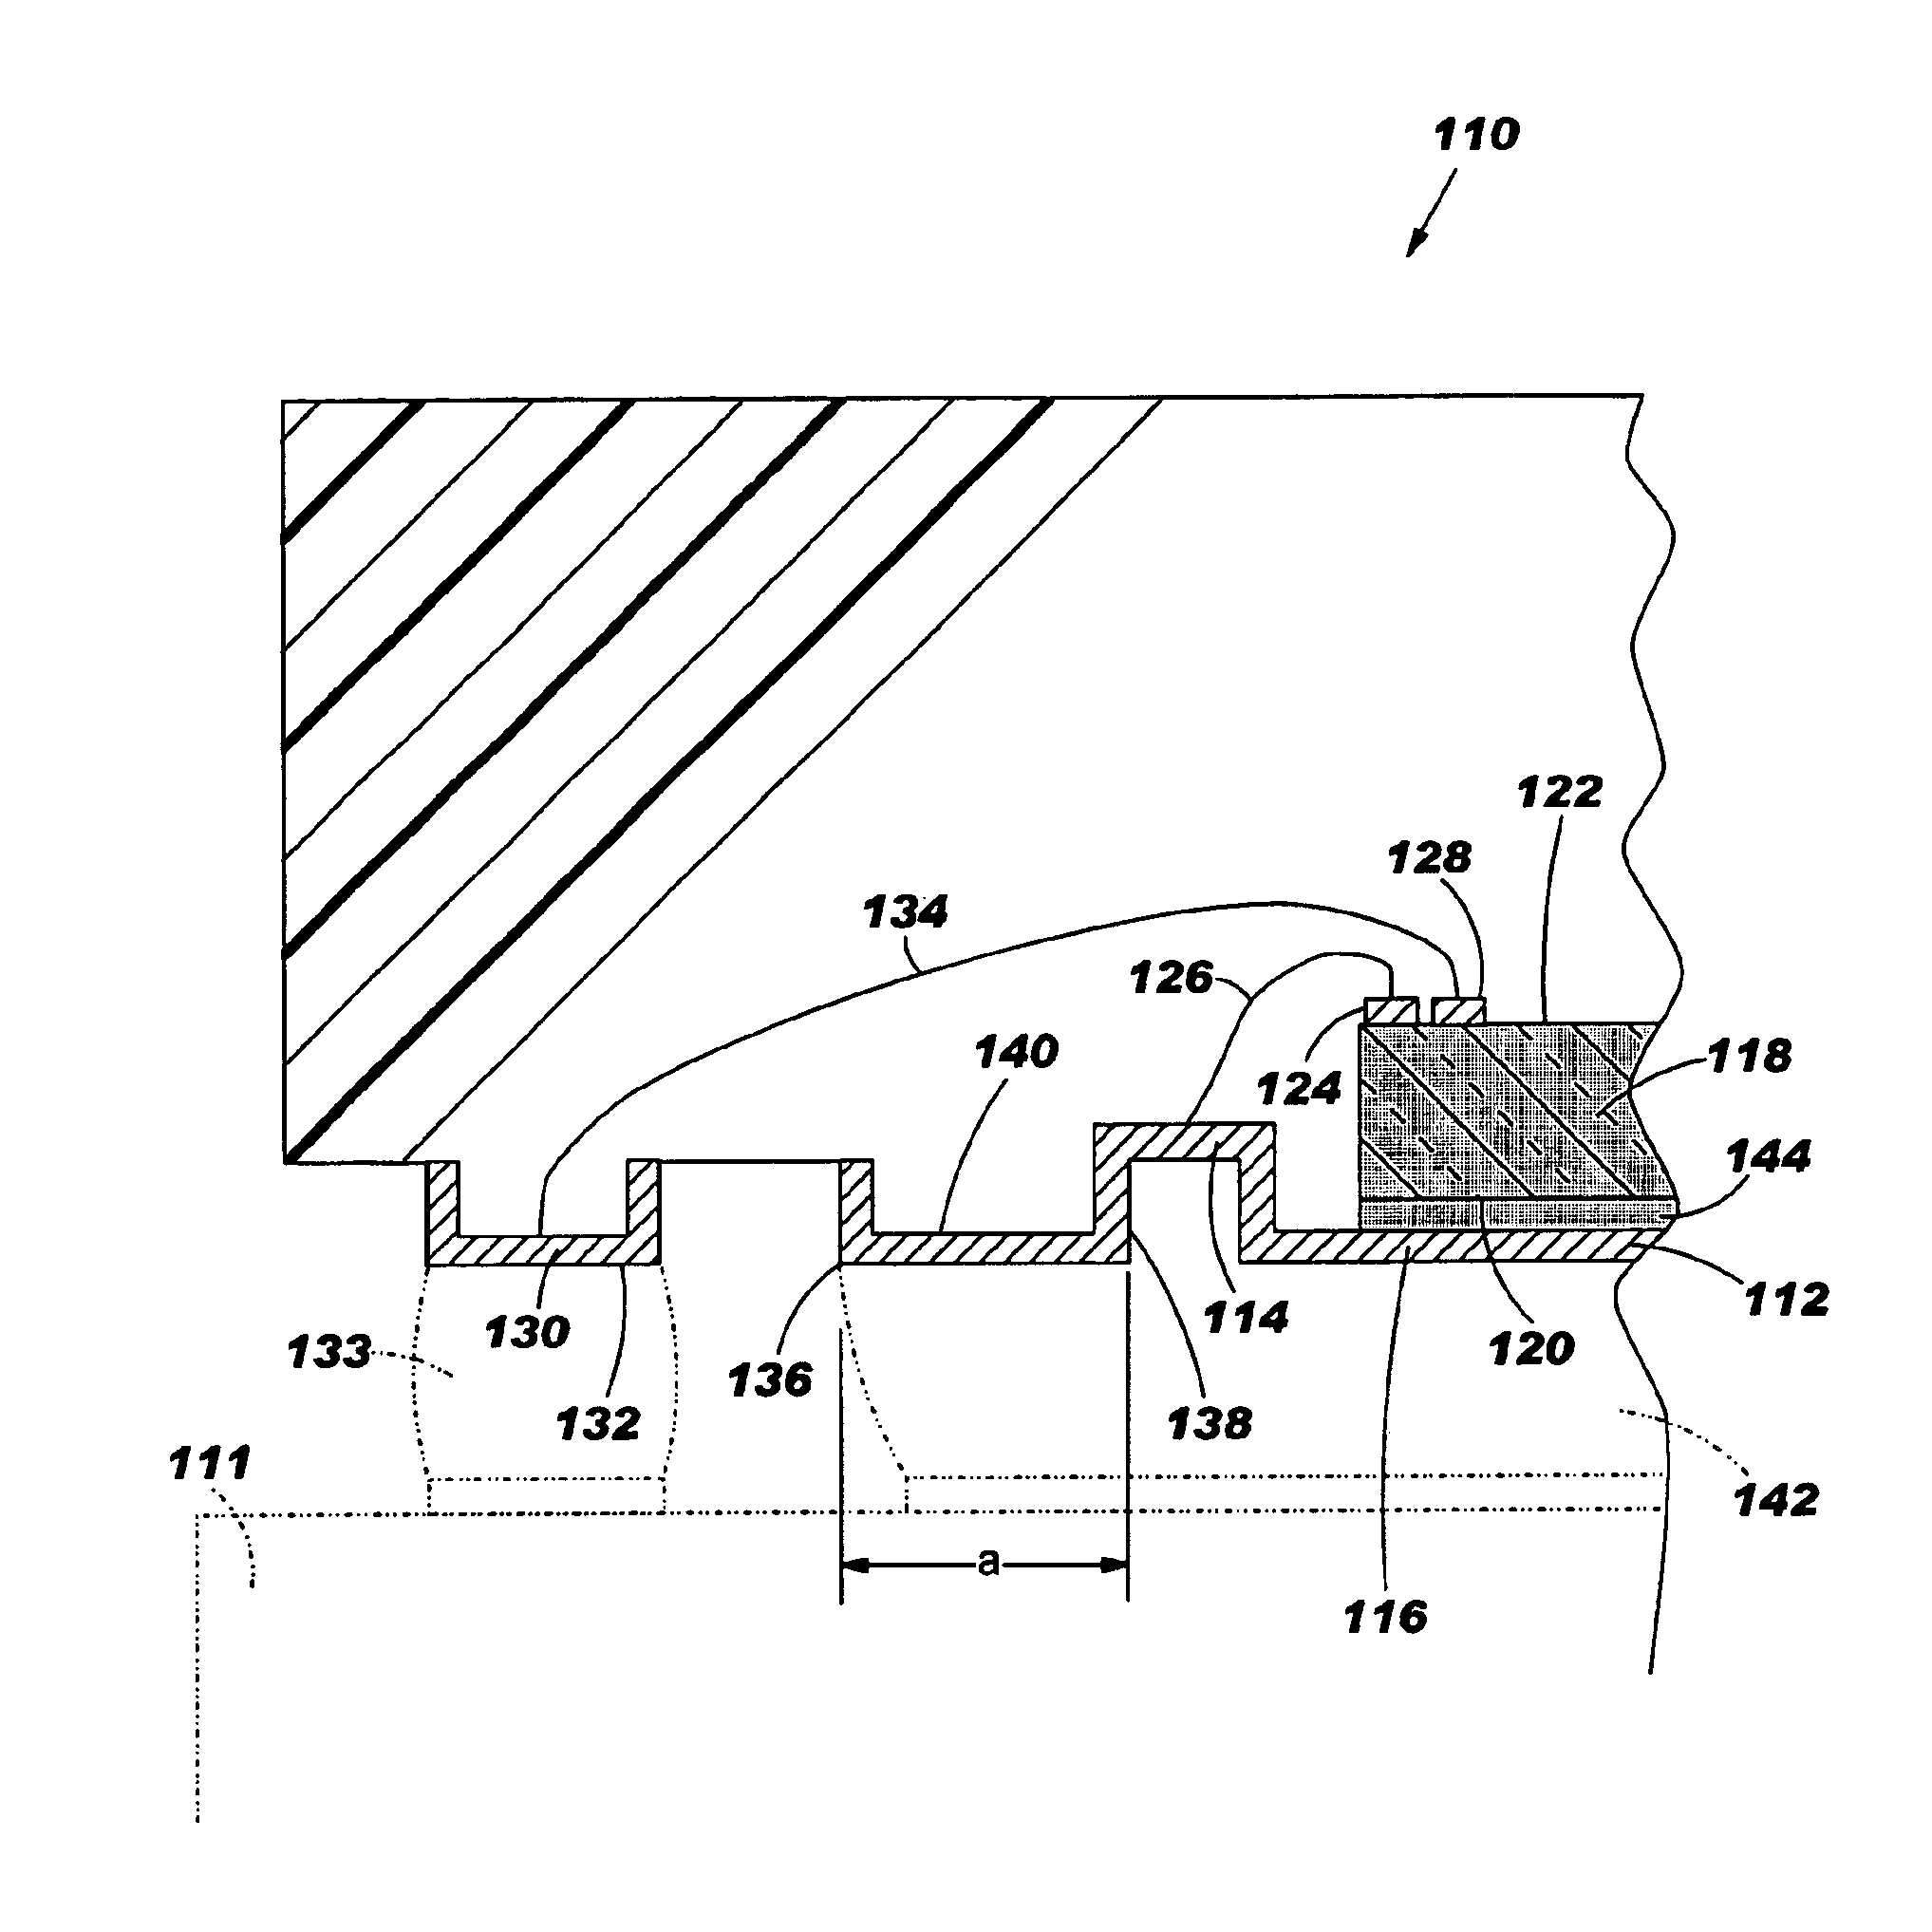 Optimized electronic package